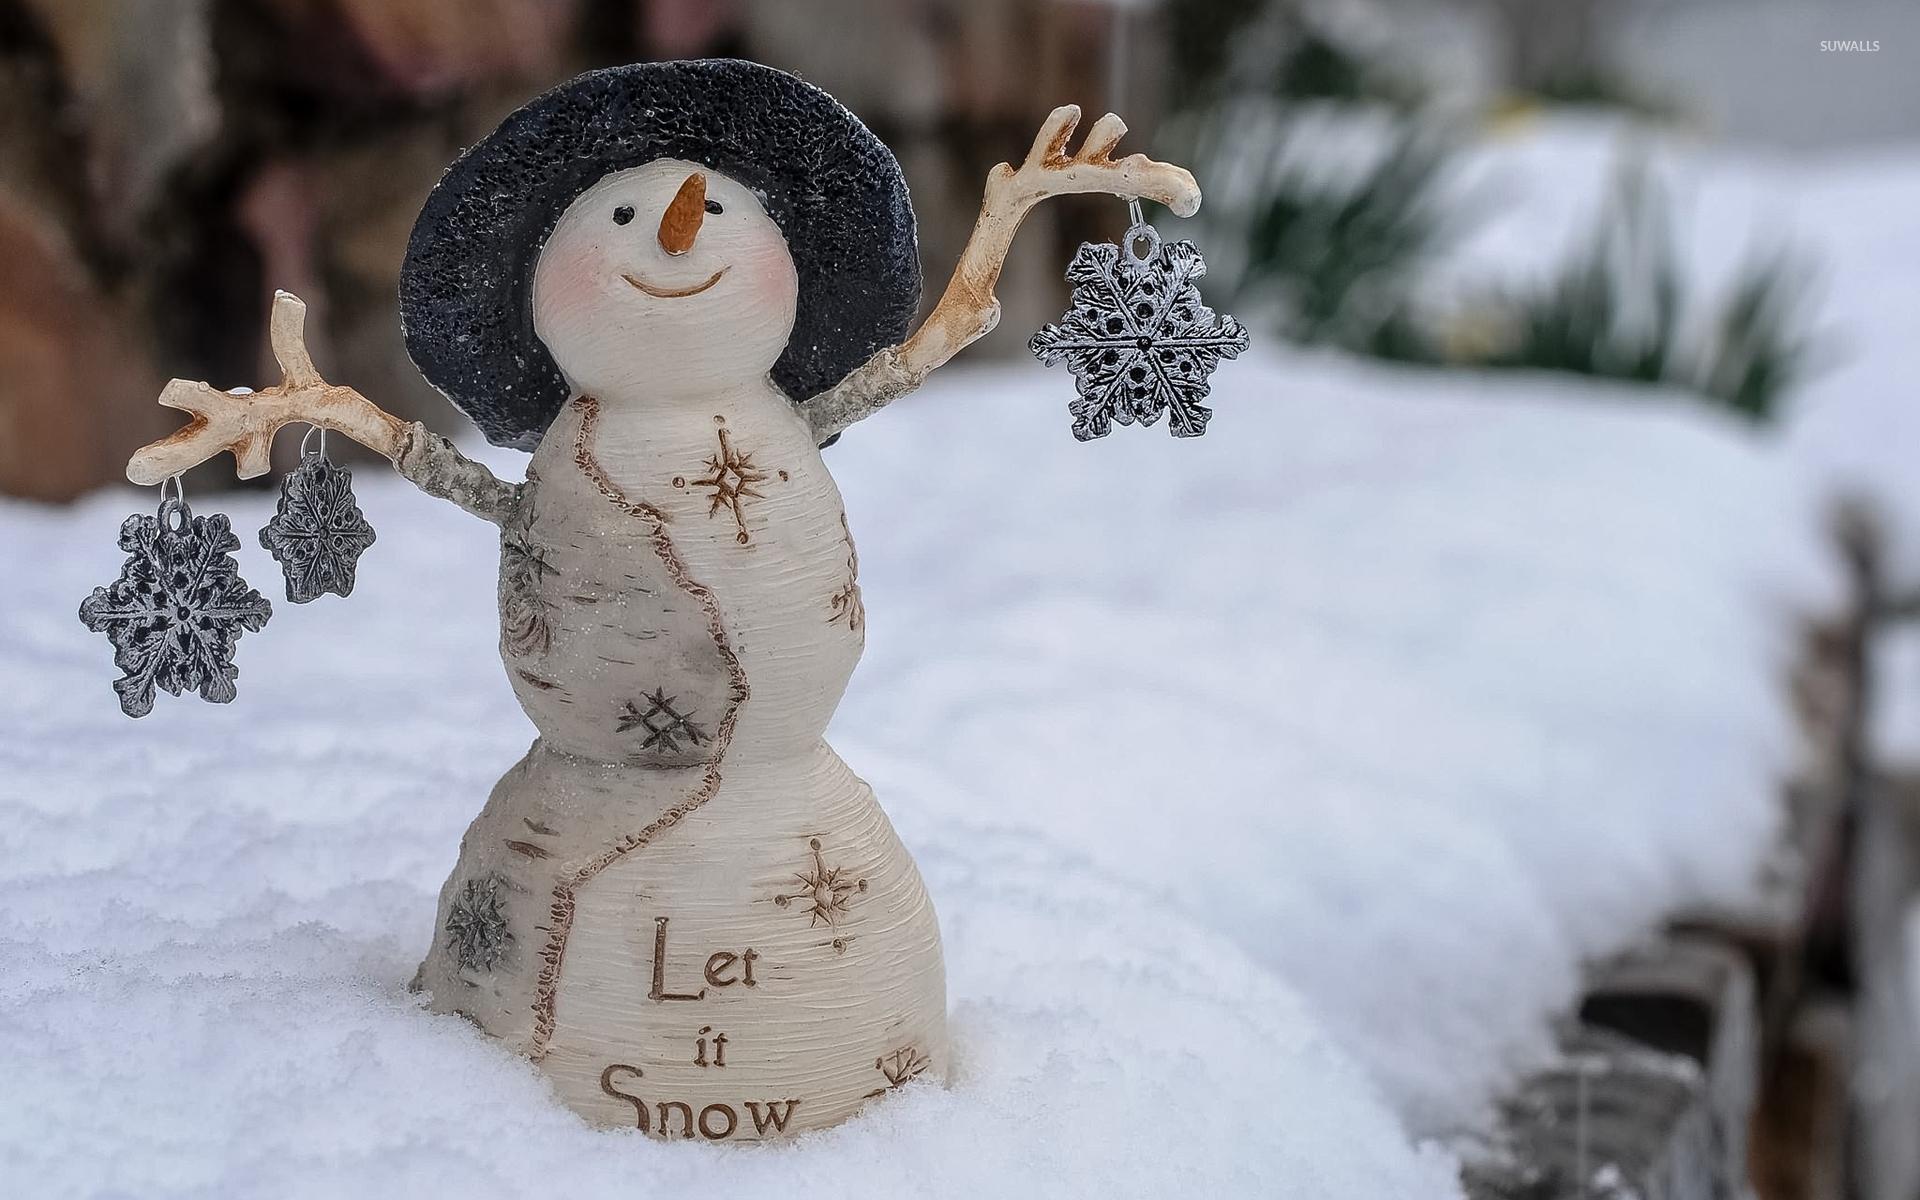 Let it snow snowman with silver snowflakes wallpaper